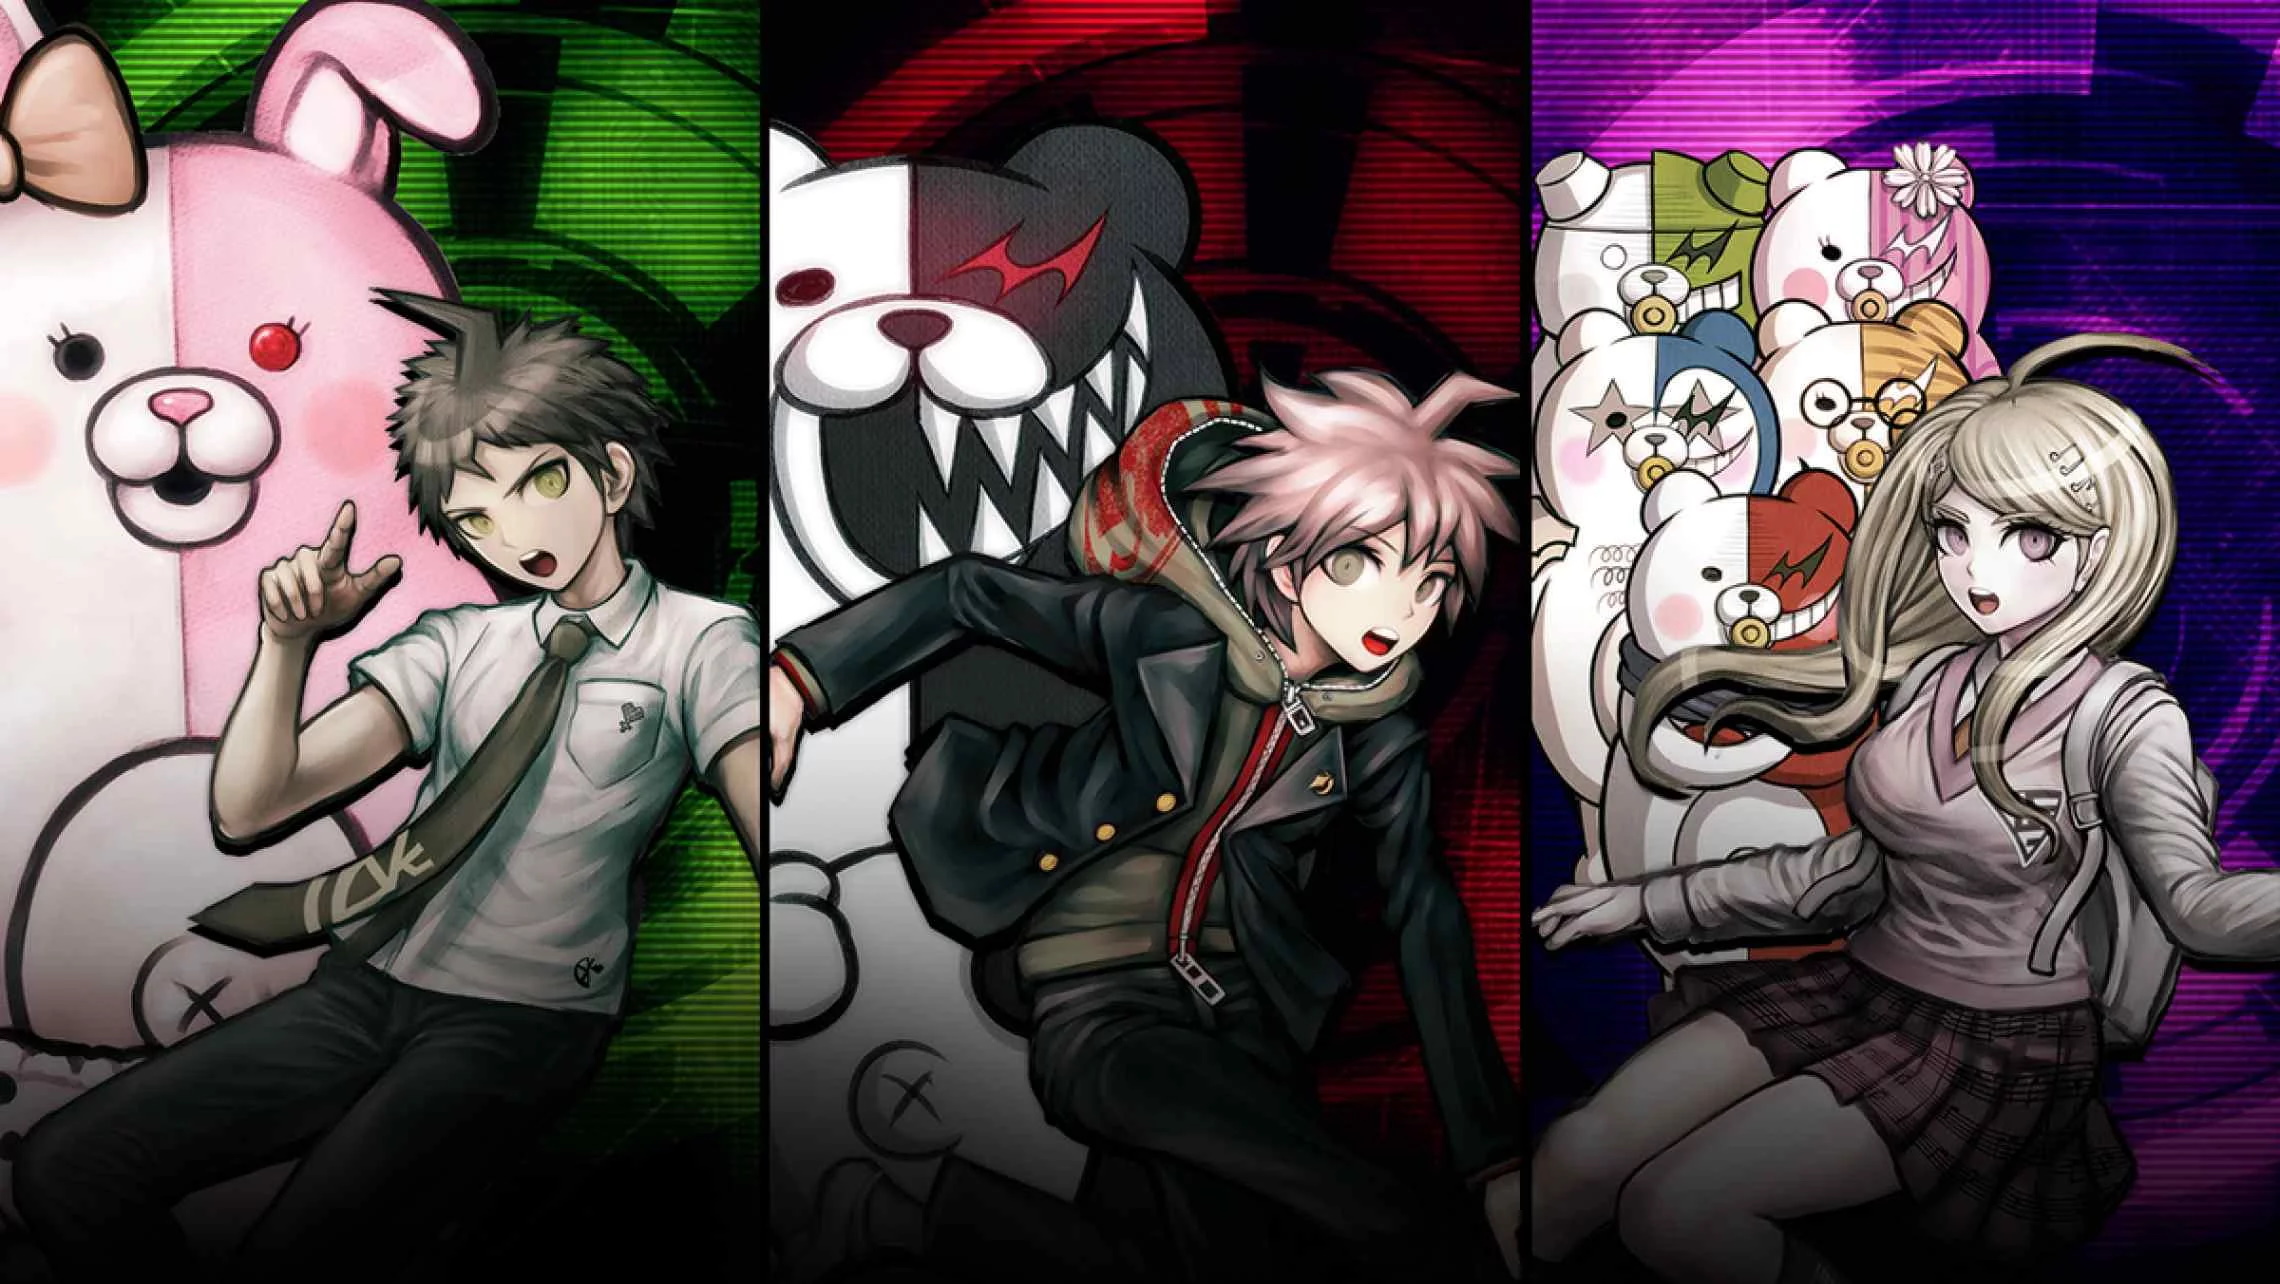 danganronpa-titles-to-be-removed-from-playstation-store.jpg